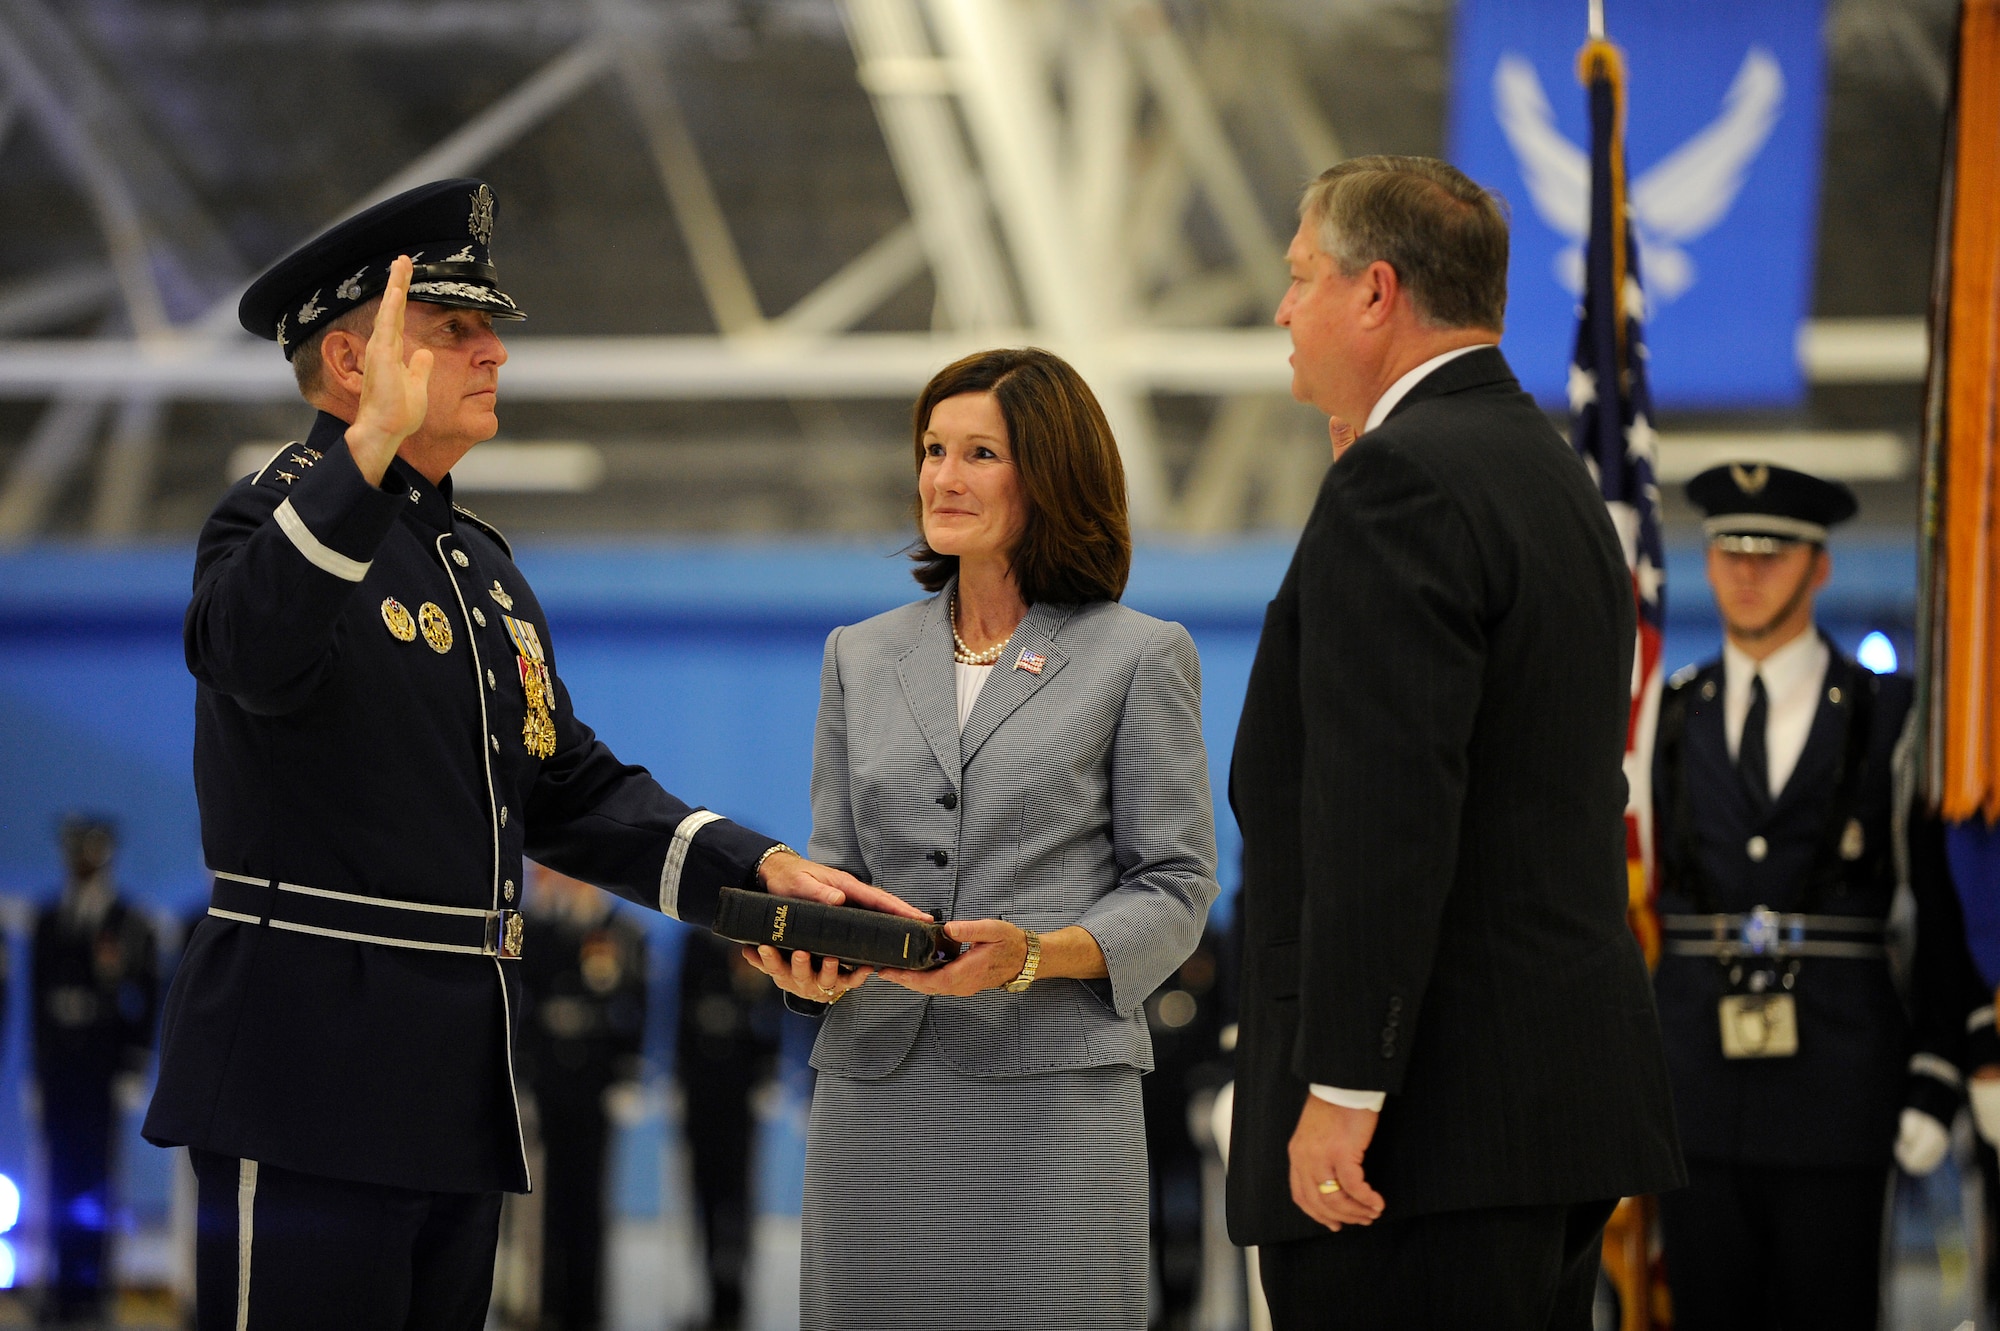 Secretary of the Air Force Michael Donley swears in Gen. Mark A. Welsh III as the 20th Air Force chief of staff, assisted by Welsh's wife, Betty, during a ceremony at Joint Base Andrews, Md., Aug. 10, 2012. (U.S. Air Force photo/Scott M. Ash)